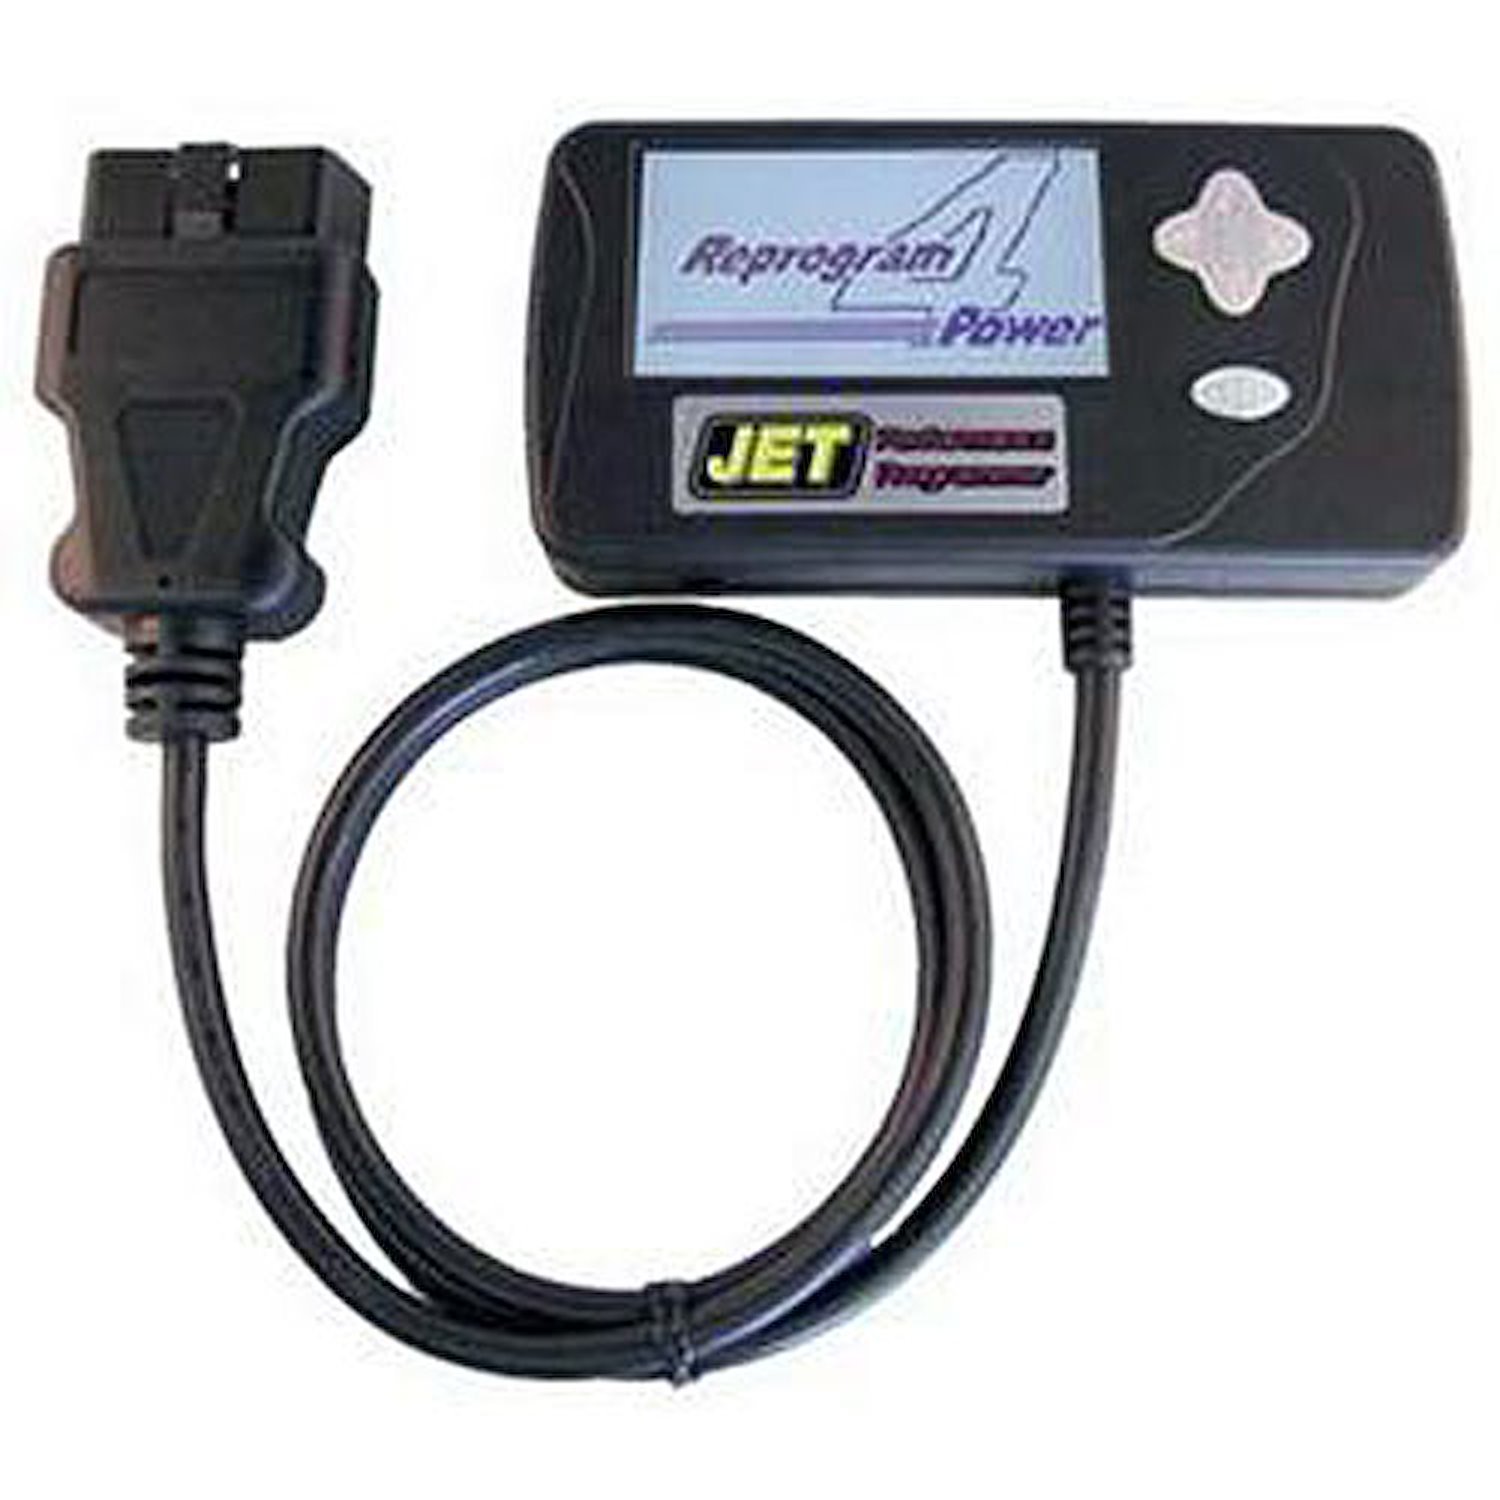 Ford Performance Programmer 2004-14 Ford Car/Truck/SUV